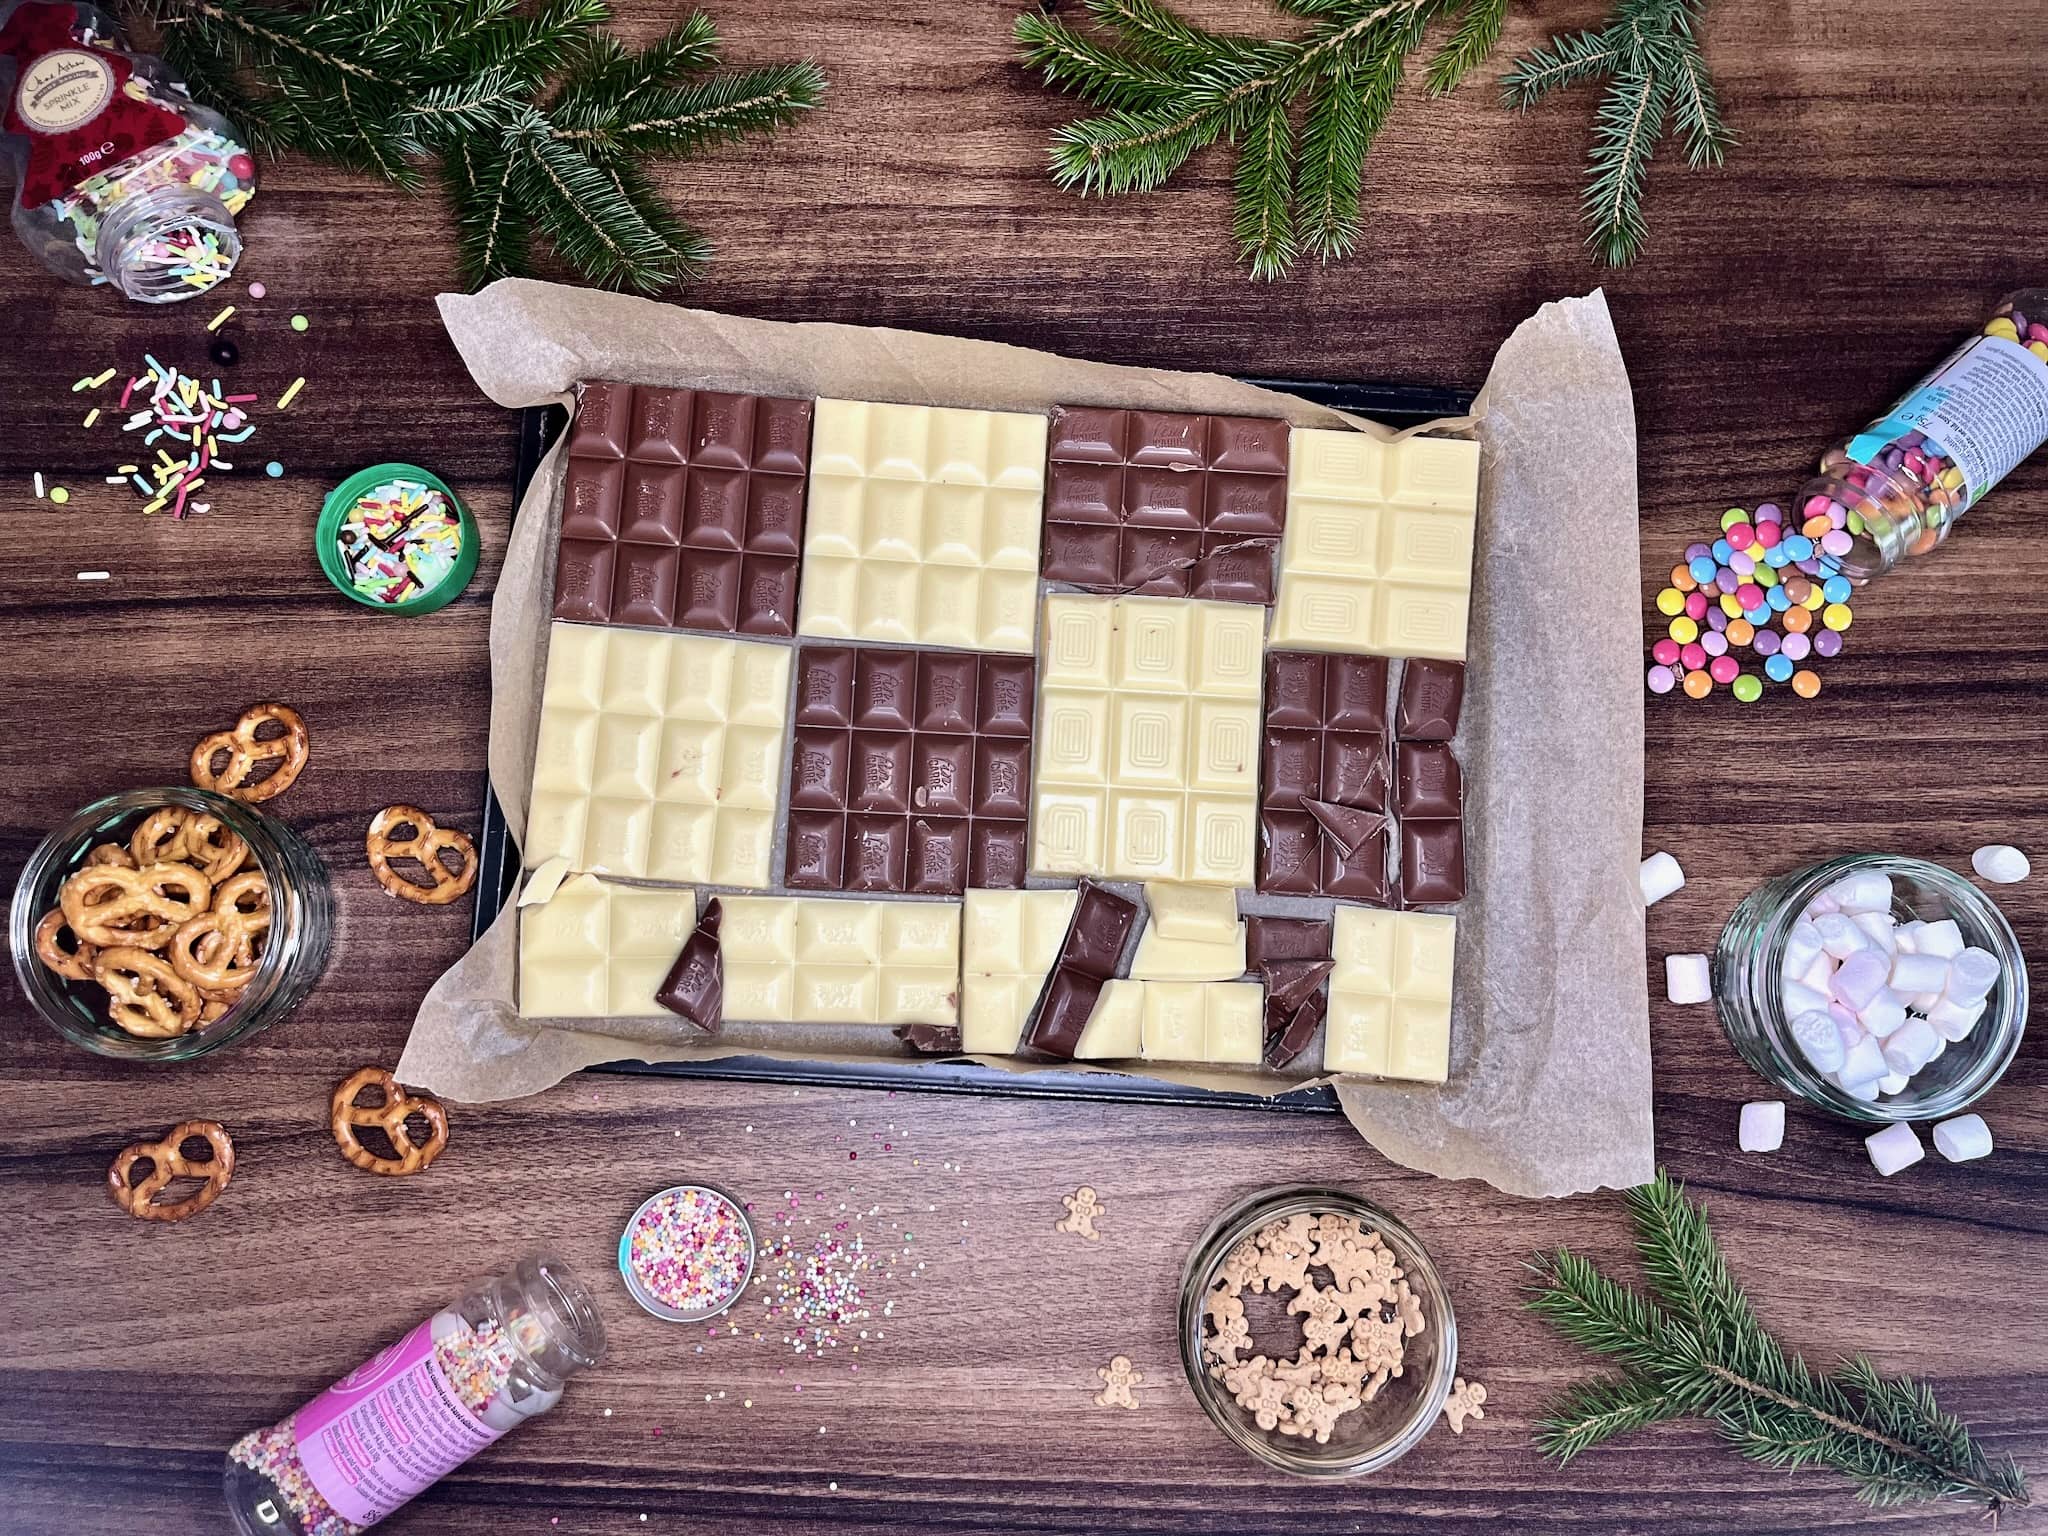 Chocolate lined on a baking tray with sprinkles scattered around on the tabletop